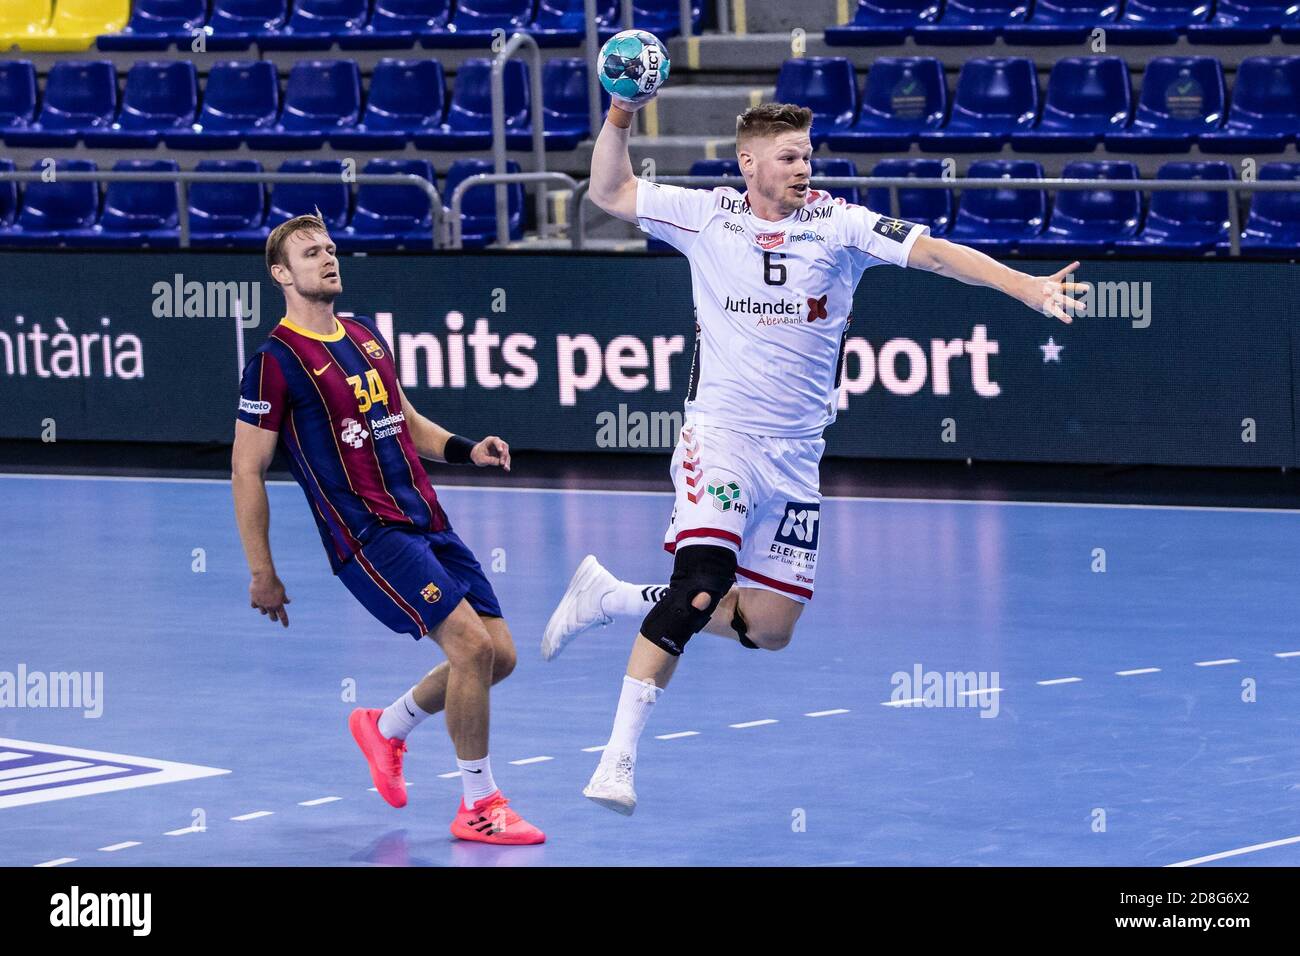 Page 2 - Handball Match High Resolution Stock Photography and Images - Alamy